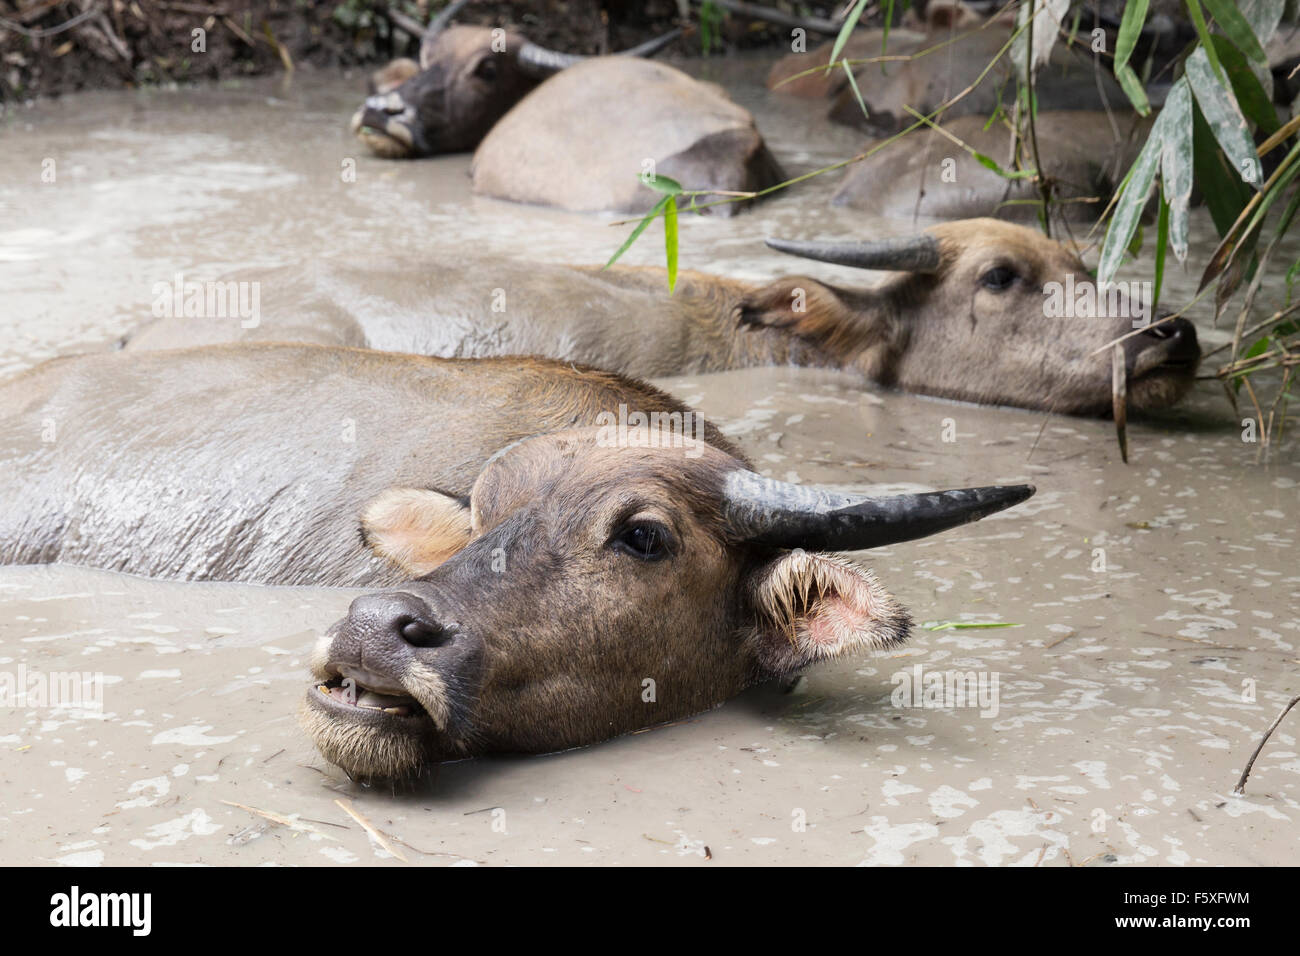 Water buffalo in a mud hole in Thailand Stock Photo